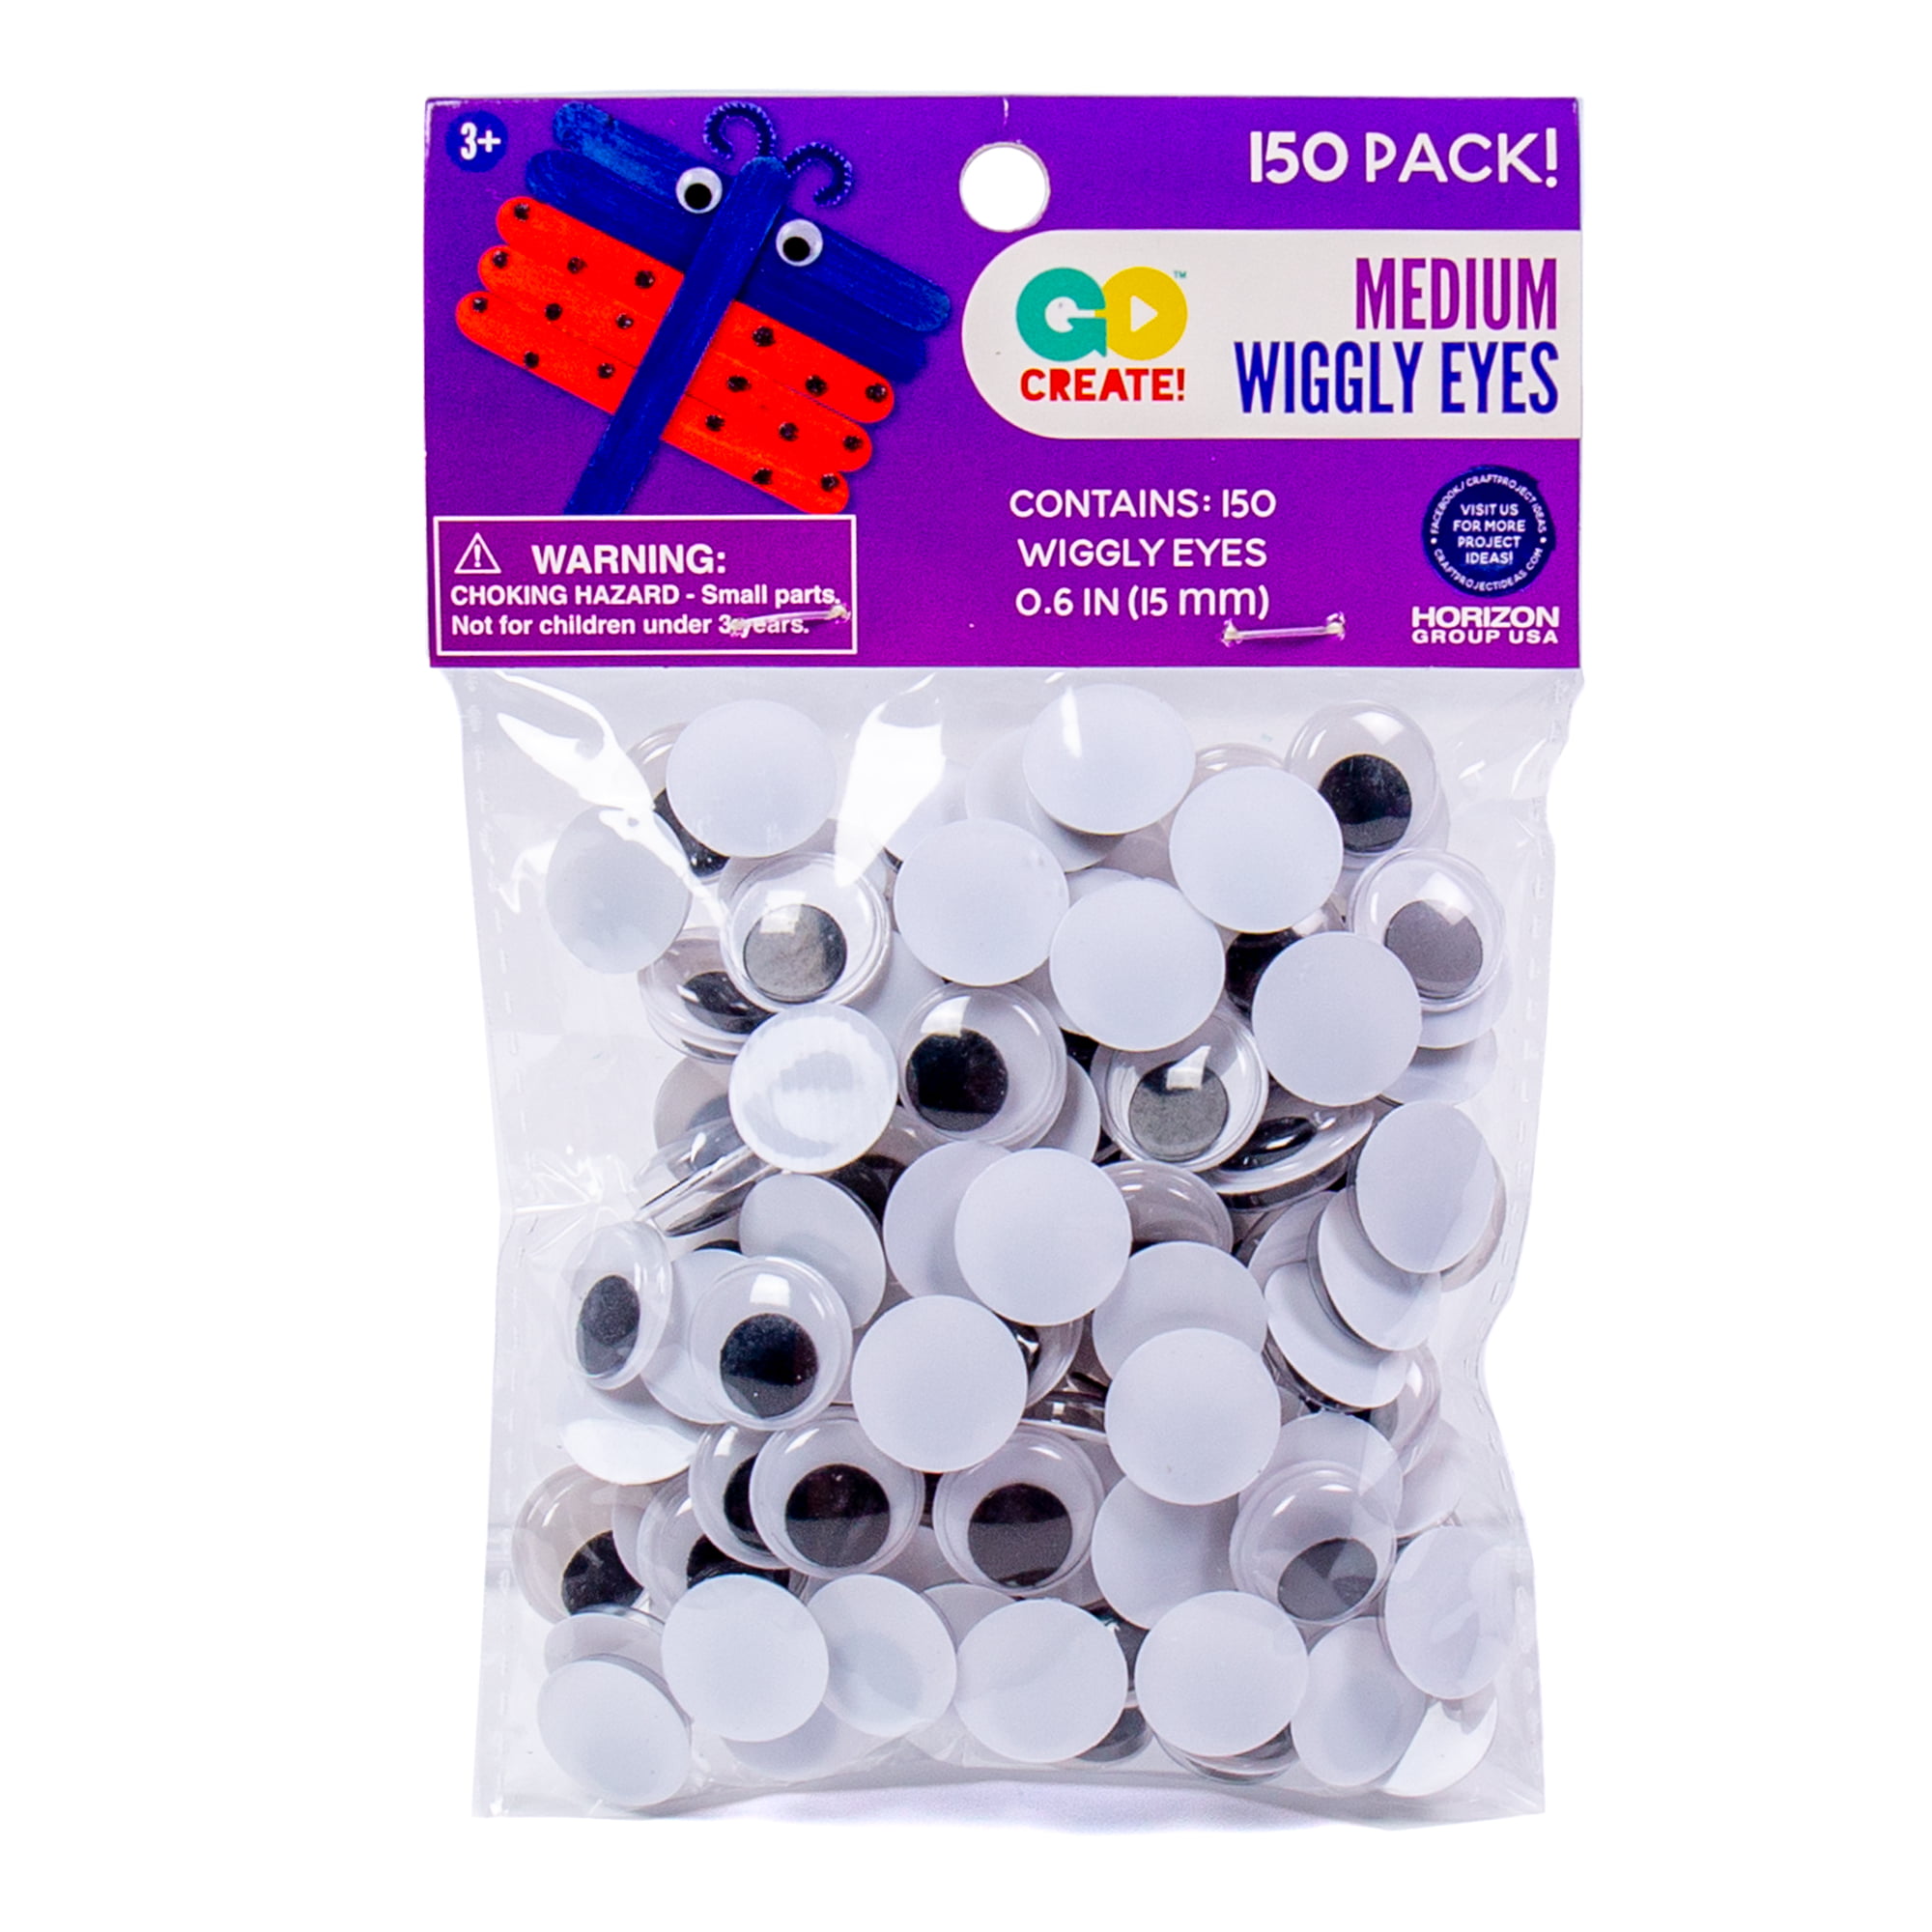 CCINEE 1150pcs Wiggle Eyes Assorted Size Bulk Plastic Googly Eyes Self  Adhesive 4mm-25mm for Craft Sticker DIY Project Supply